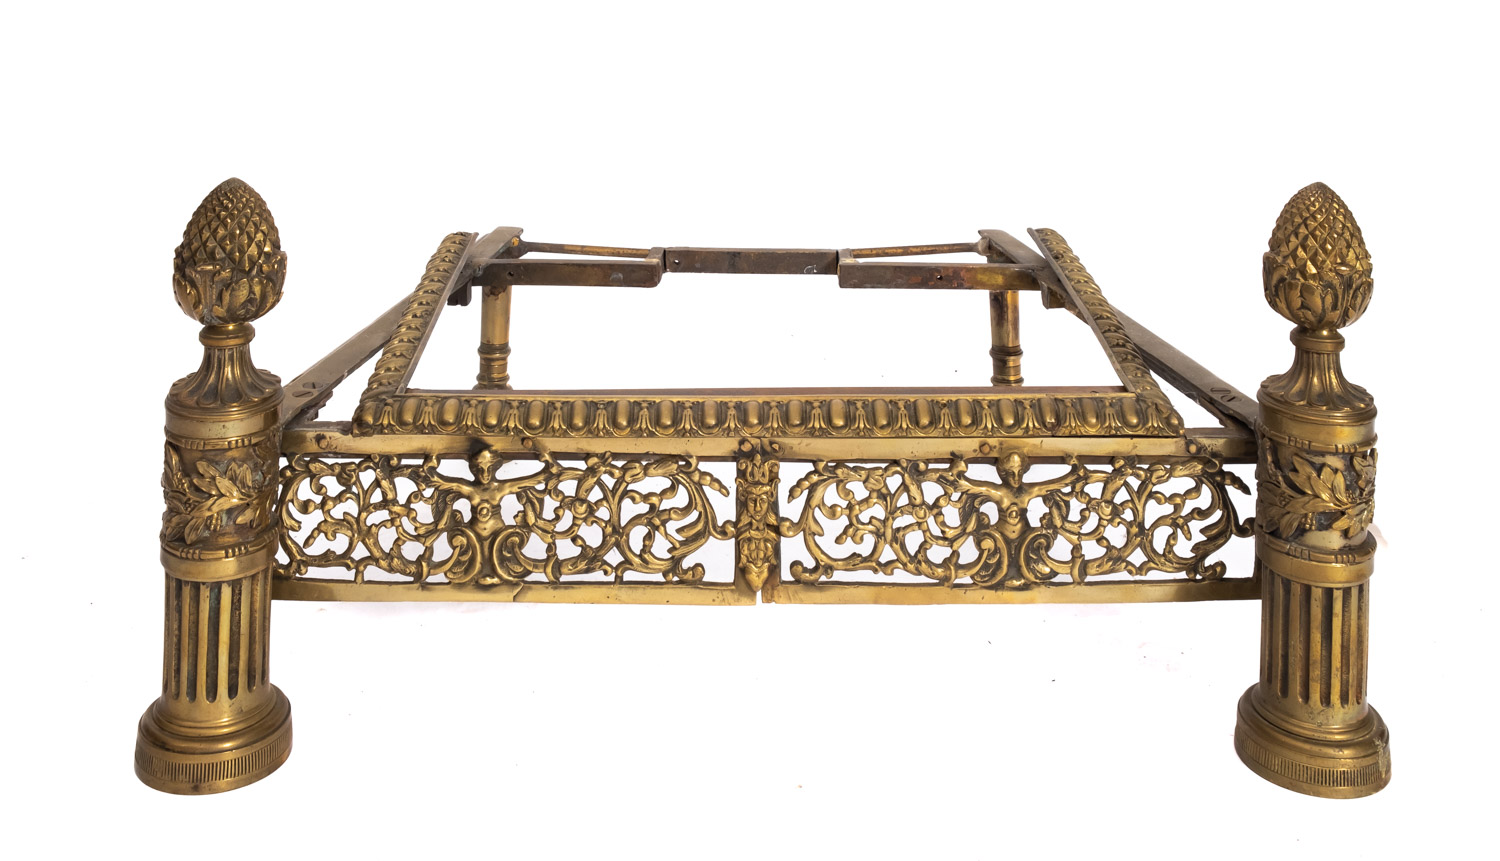 The stand for a 19th Century fire grate,